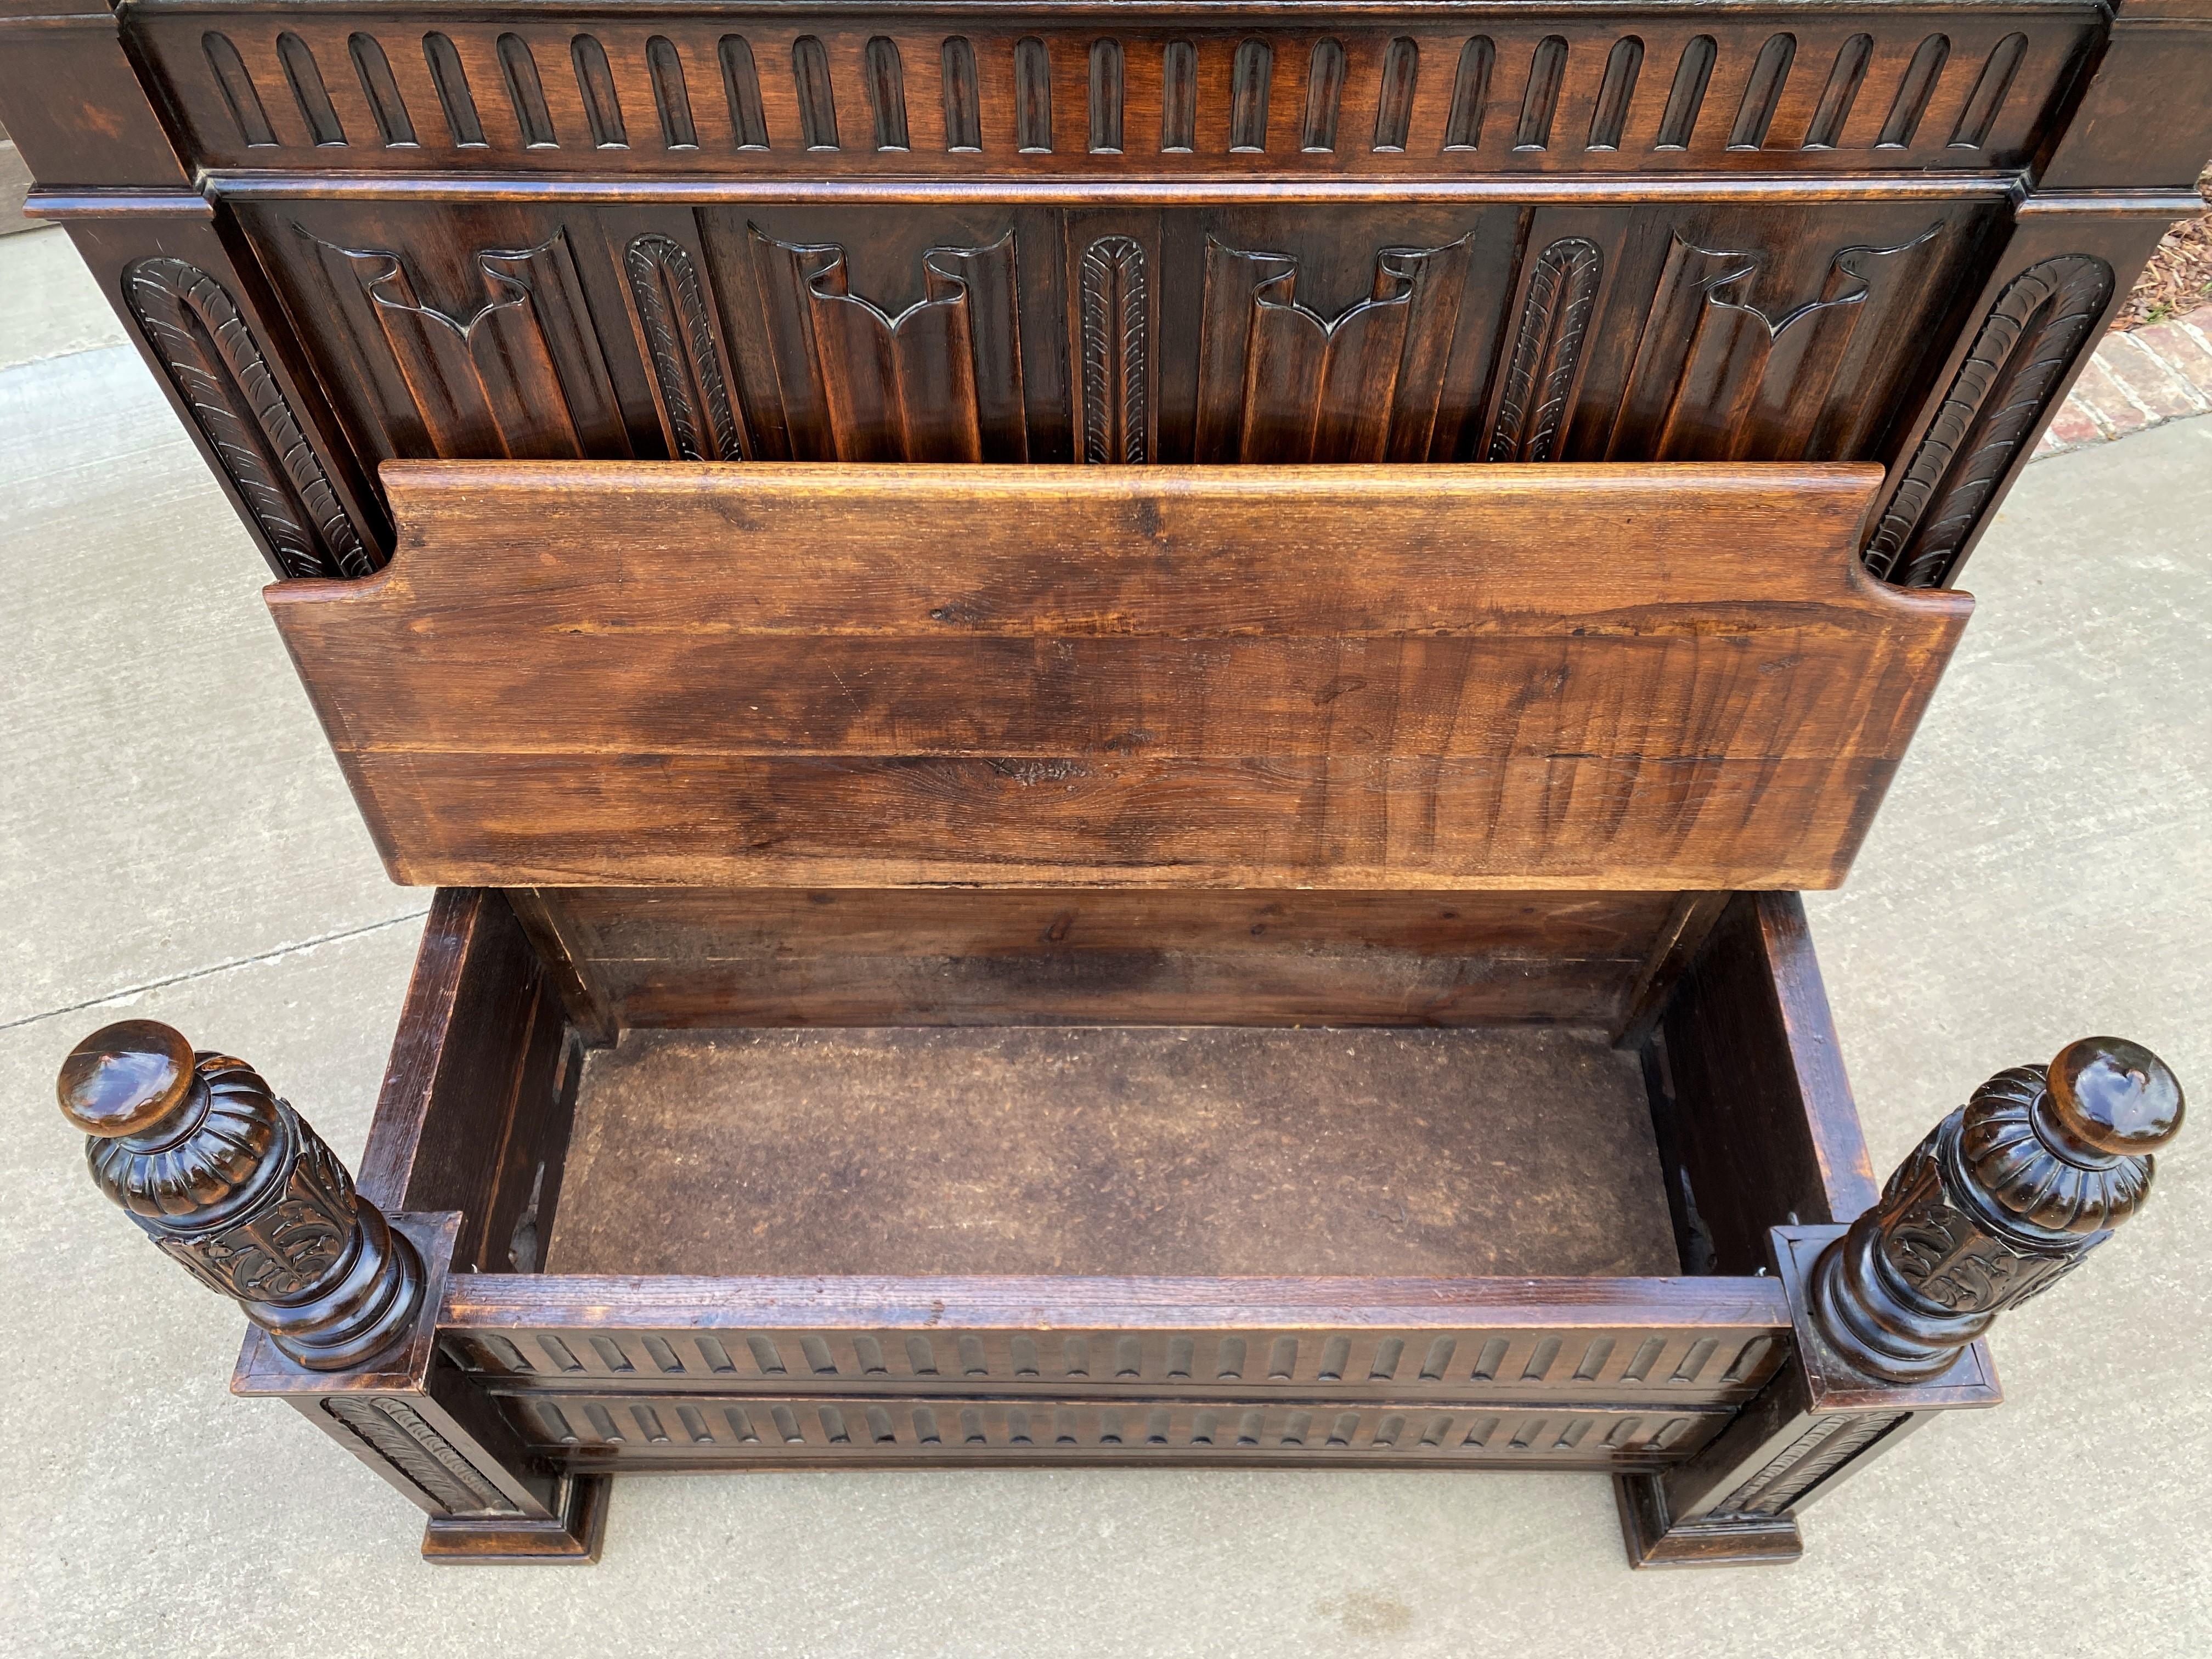 Antique French Bench Settee Gothic Revival Oak Lift Top Seat Storage Trunk 19C For Sale 11